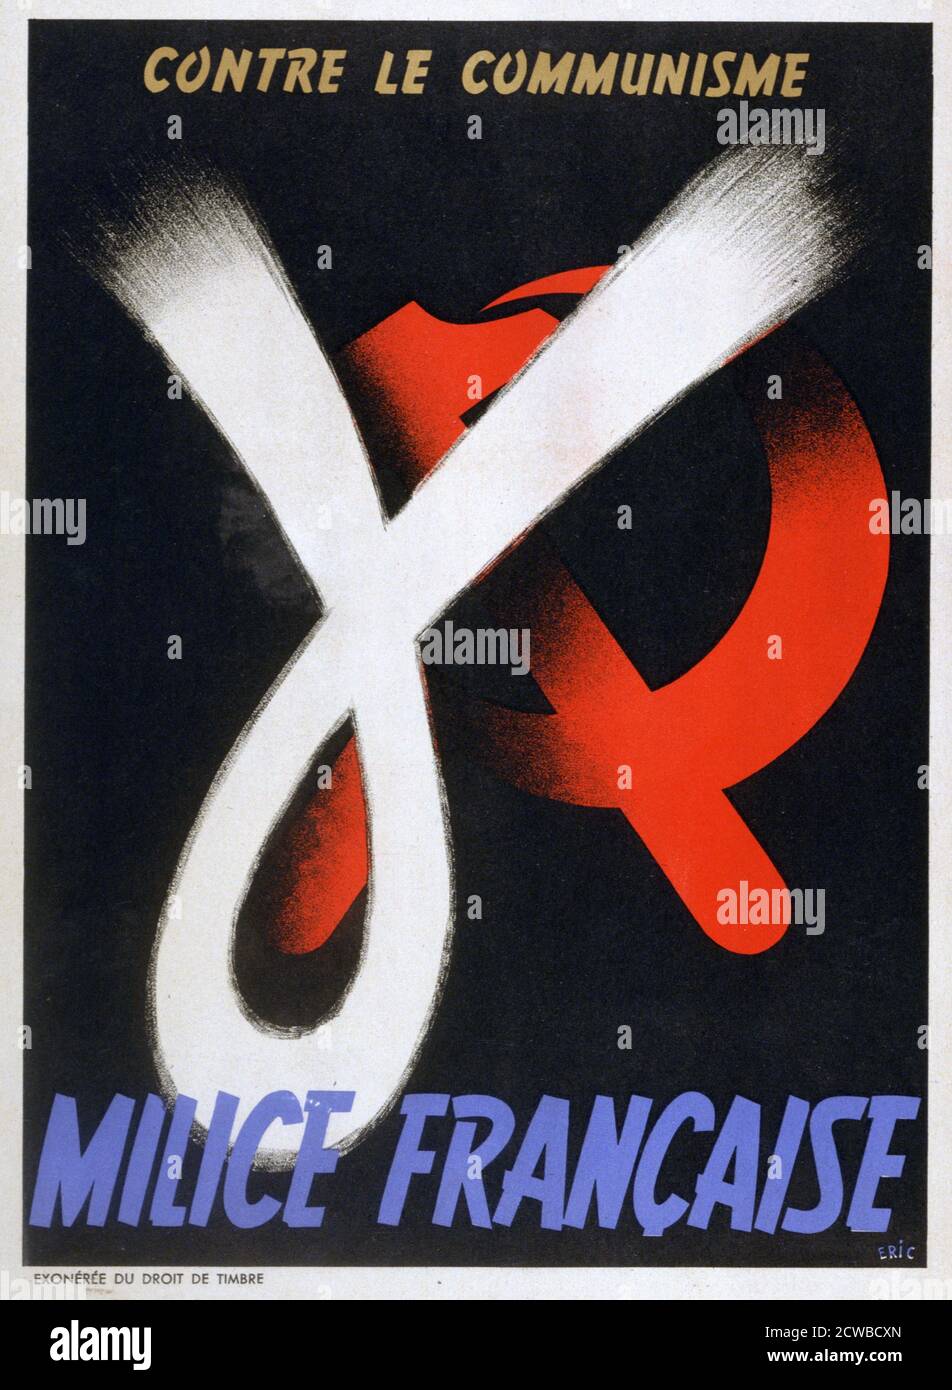 Against Communism', poster for the French Milice, 1943-1944. The Milice (militia), also known as the French Gestapo, was a paramilitary force created in 1943, with German aid, primarily to fight against the French Resistance. They were also actively rounded up France's Jewish population for deportation. The inverted white ribbon was the Milice's logo and the artist is unknown. Stock Photo